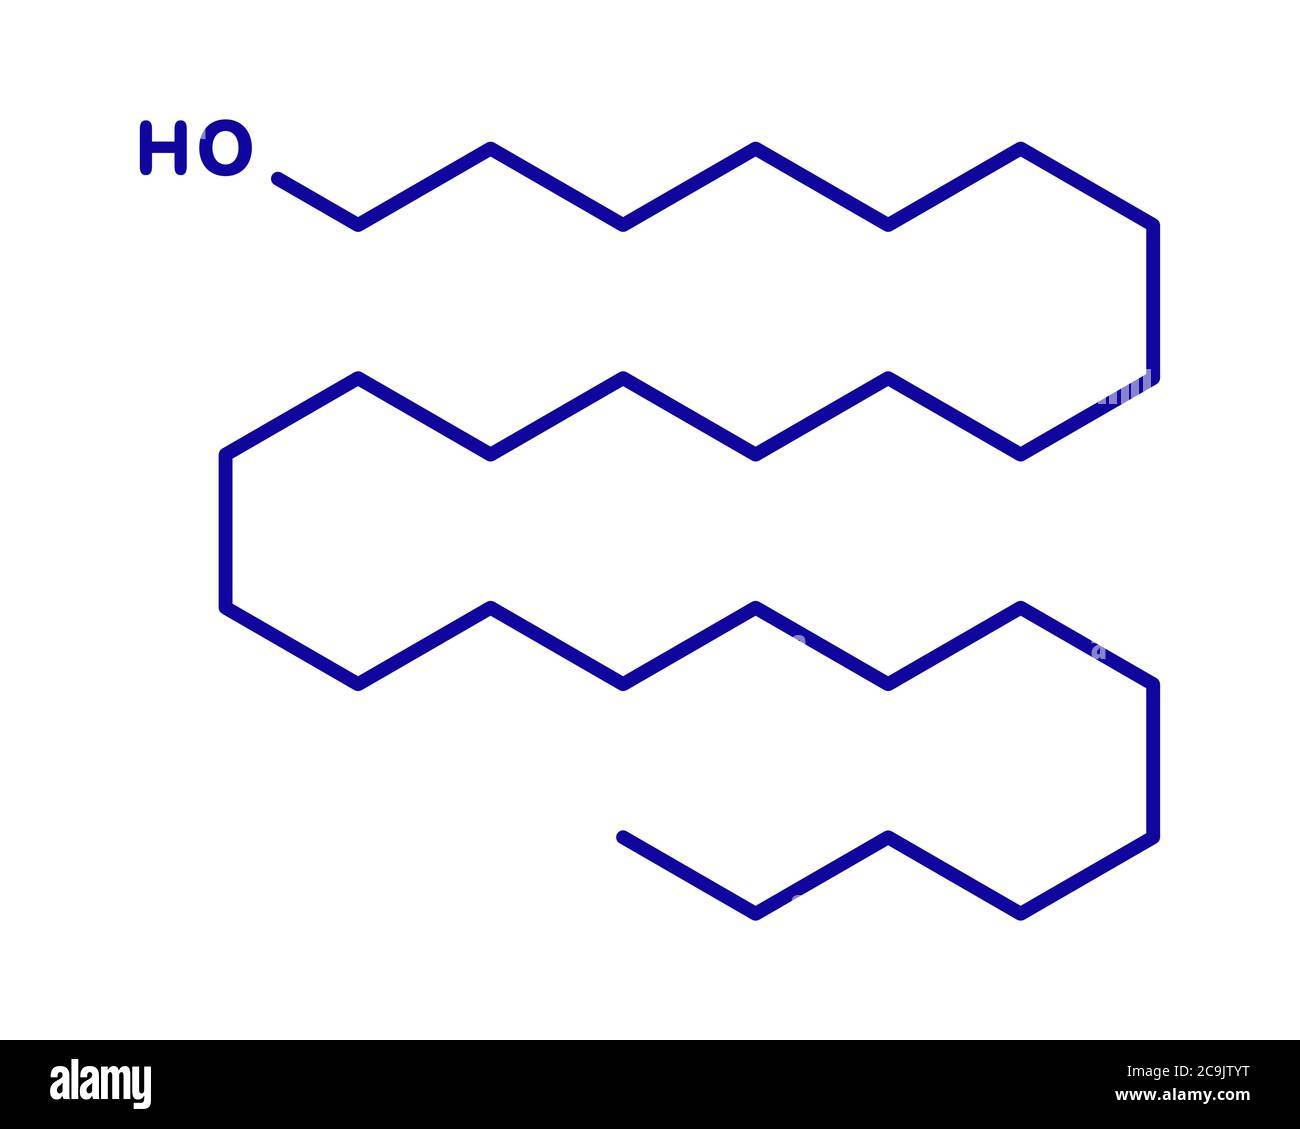 Octacosanol plant wax component molecule. long chain fatty alcohol, present in e.g. the waxy cover of eucalyptus leaves. Main constituent of policosan Stock Photo